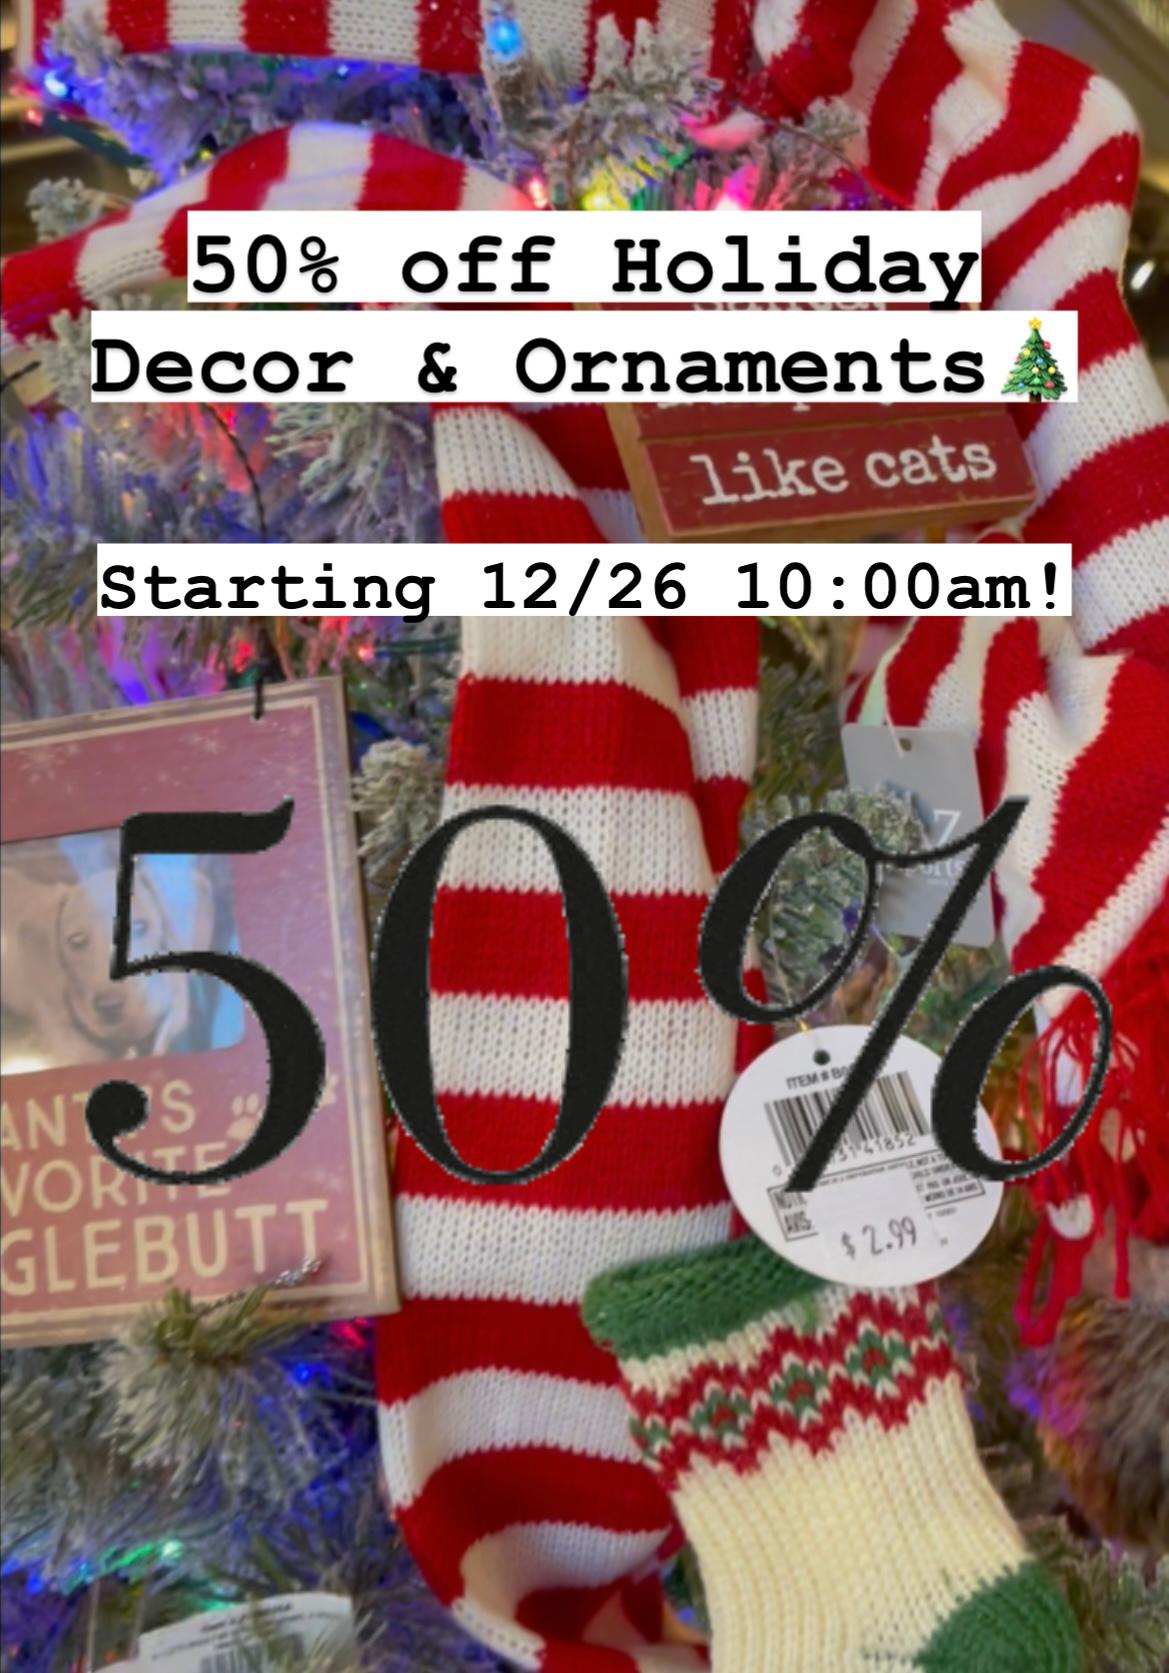 Join us today for our Post Christmas Holiday Sale! All of our holiday decor and ornaments will be 50% off!  